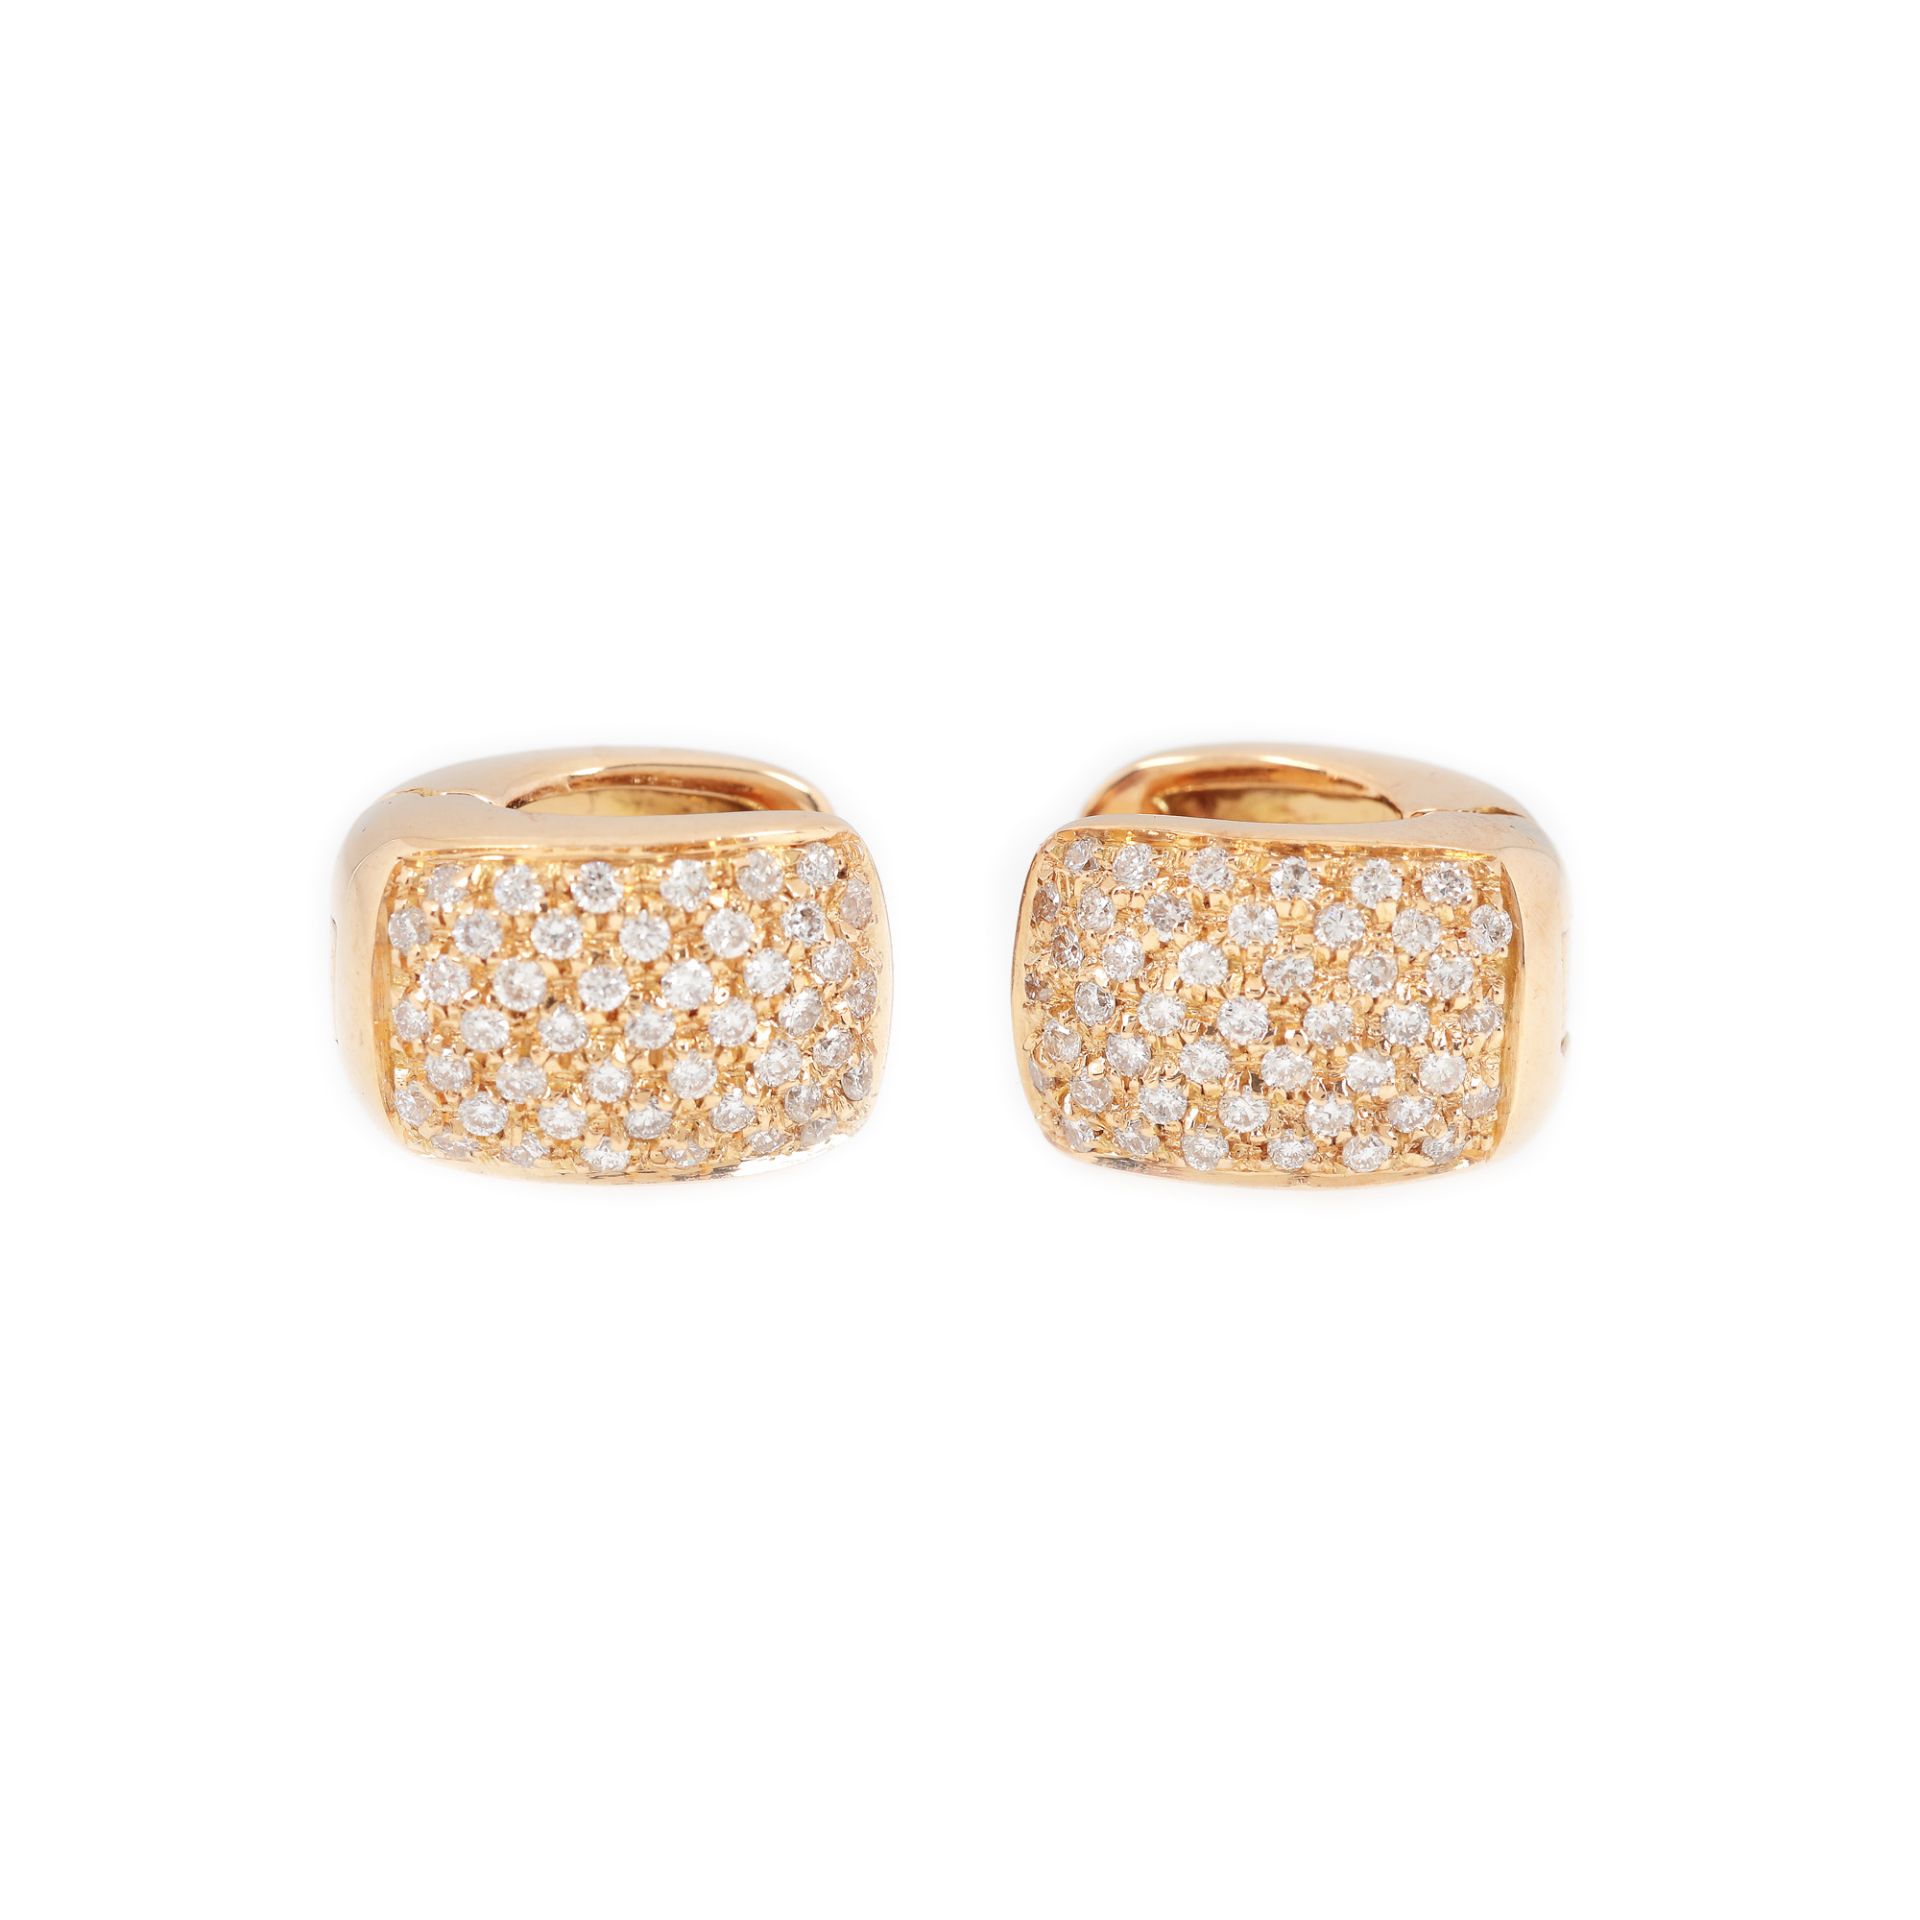 Gold earrings, paved with diamonds